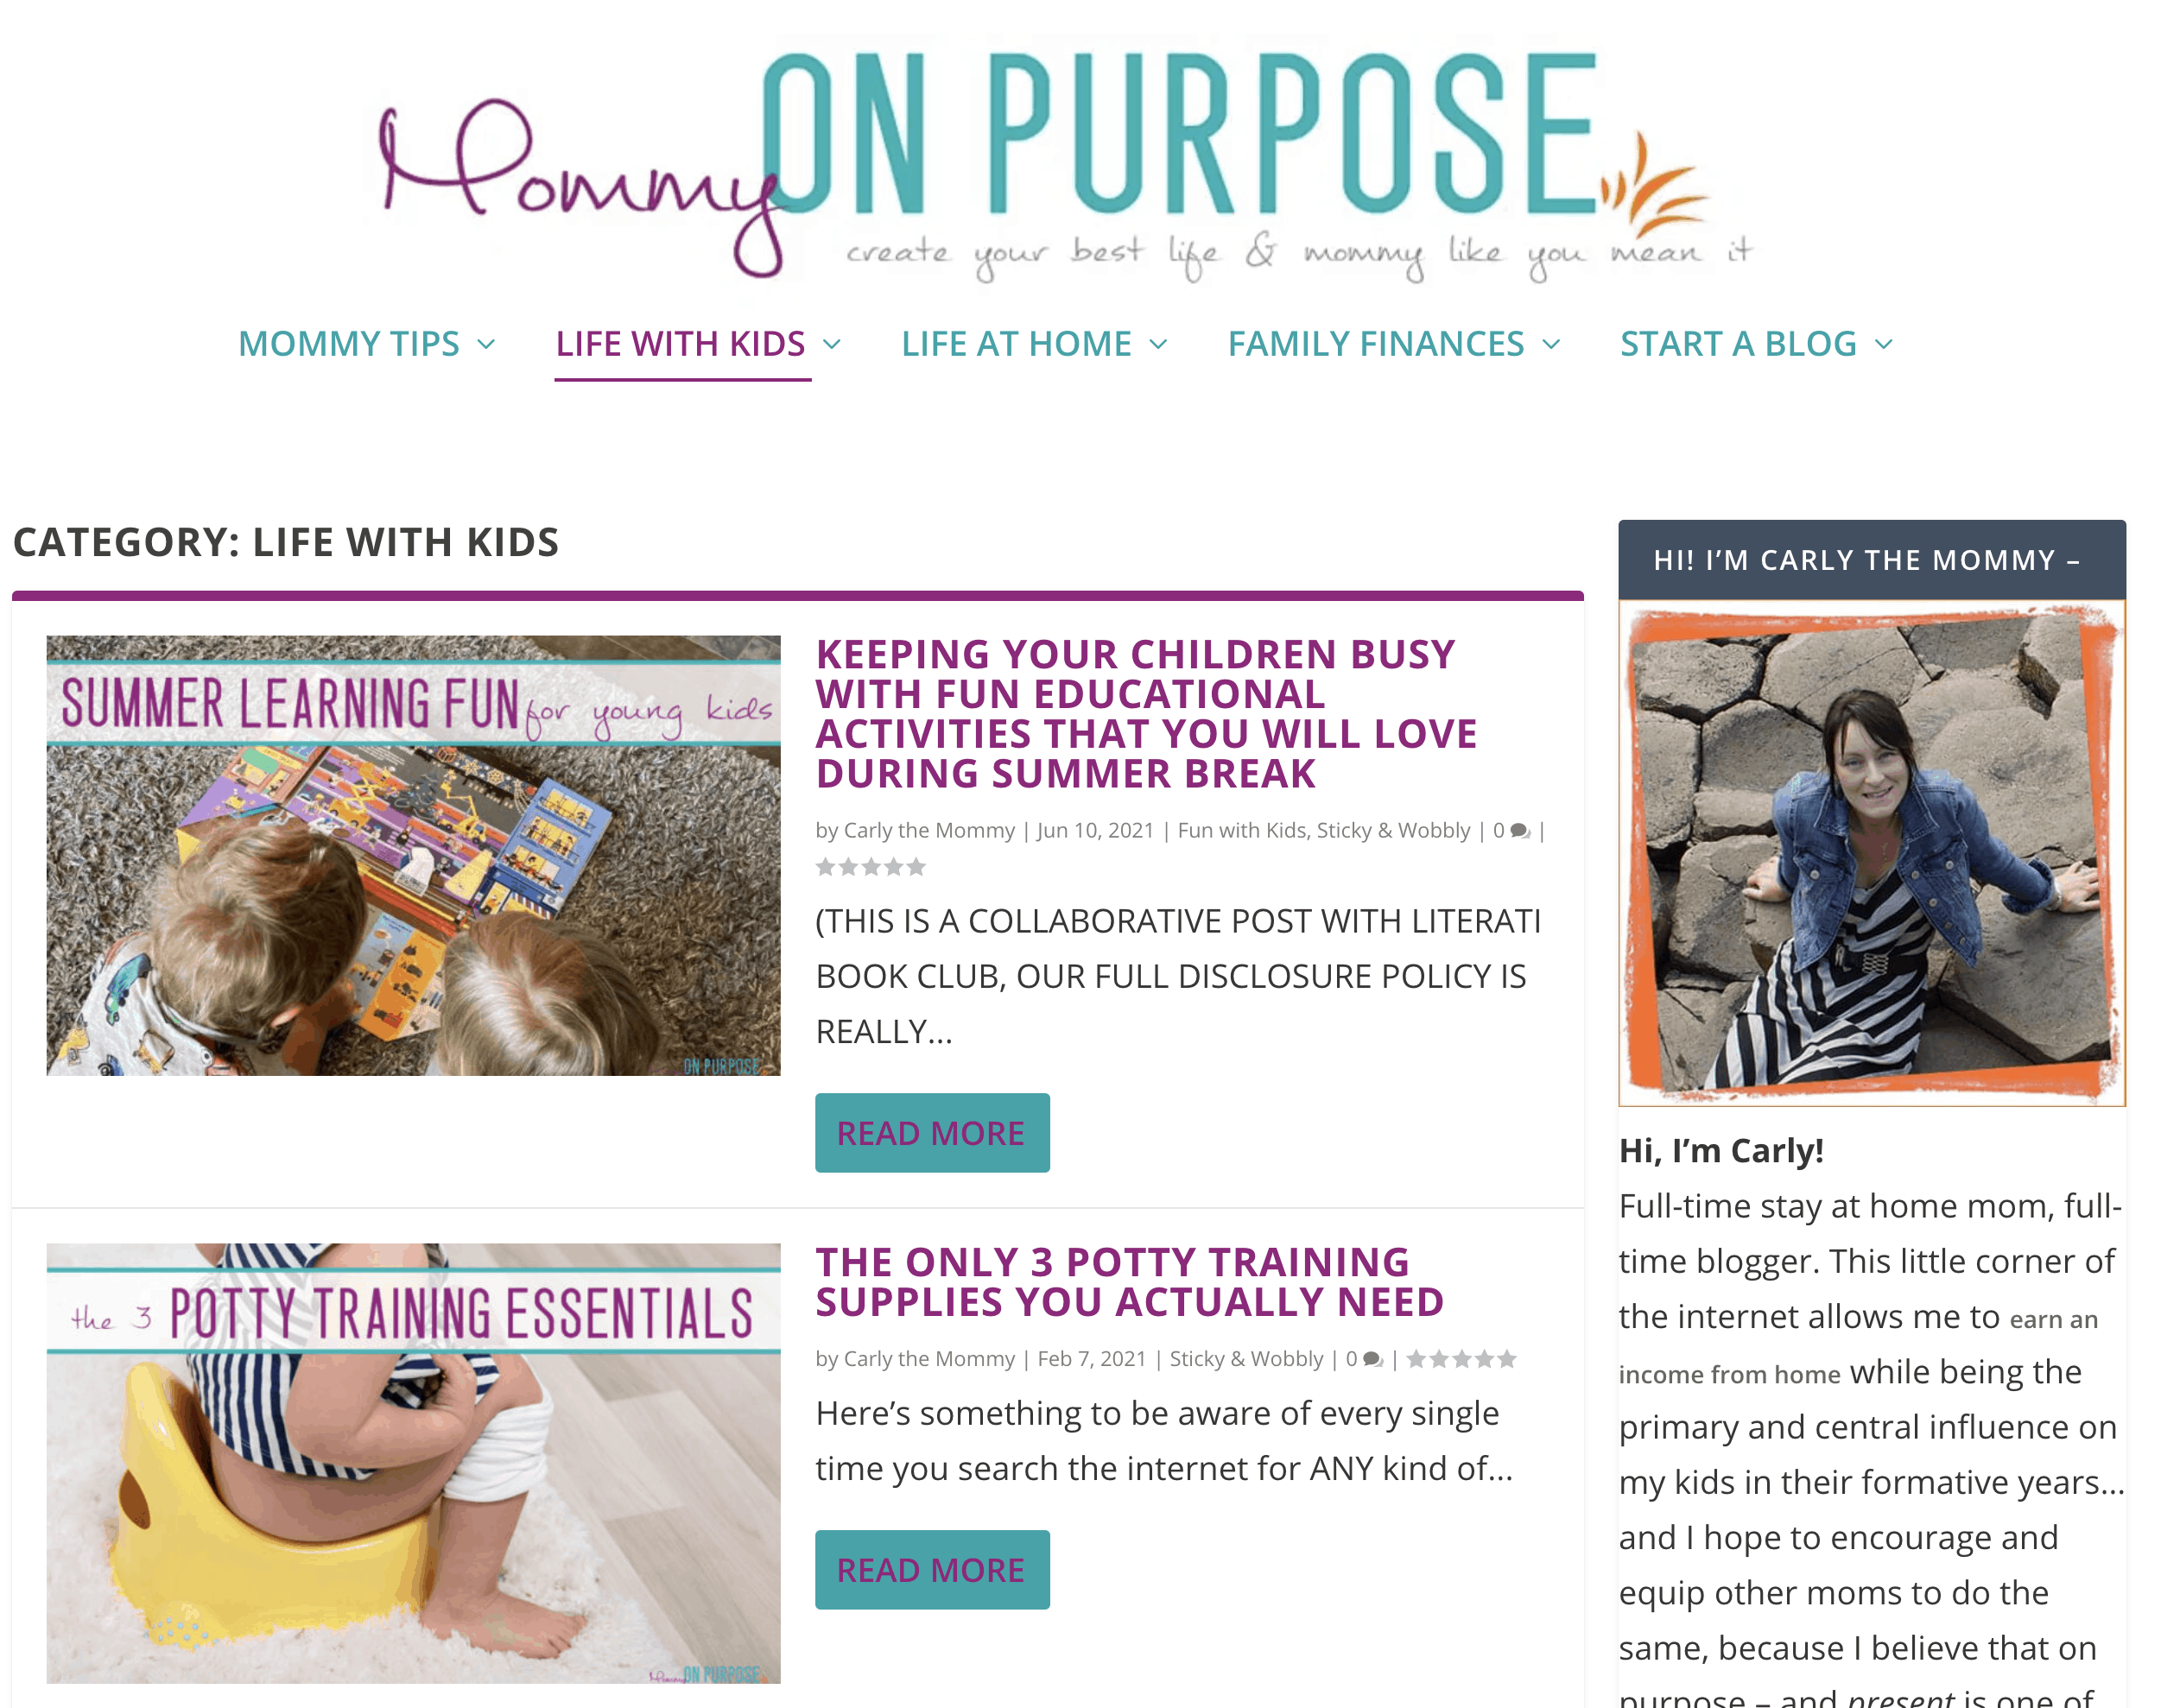 Mommy on Purpose is a beautiful mom blog that is very well known in the blogging community.